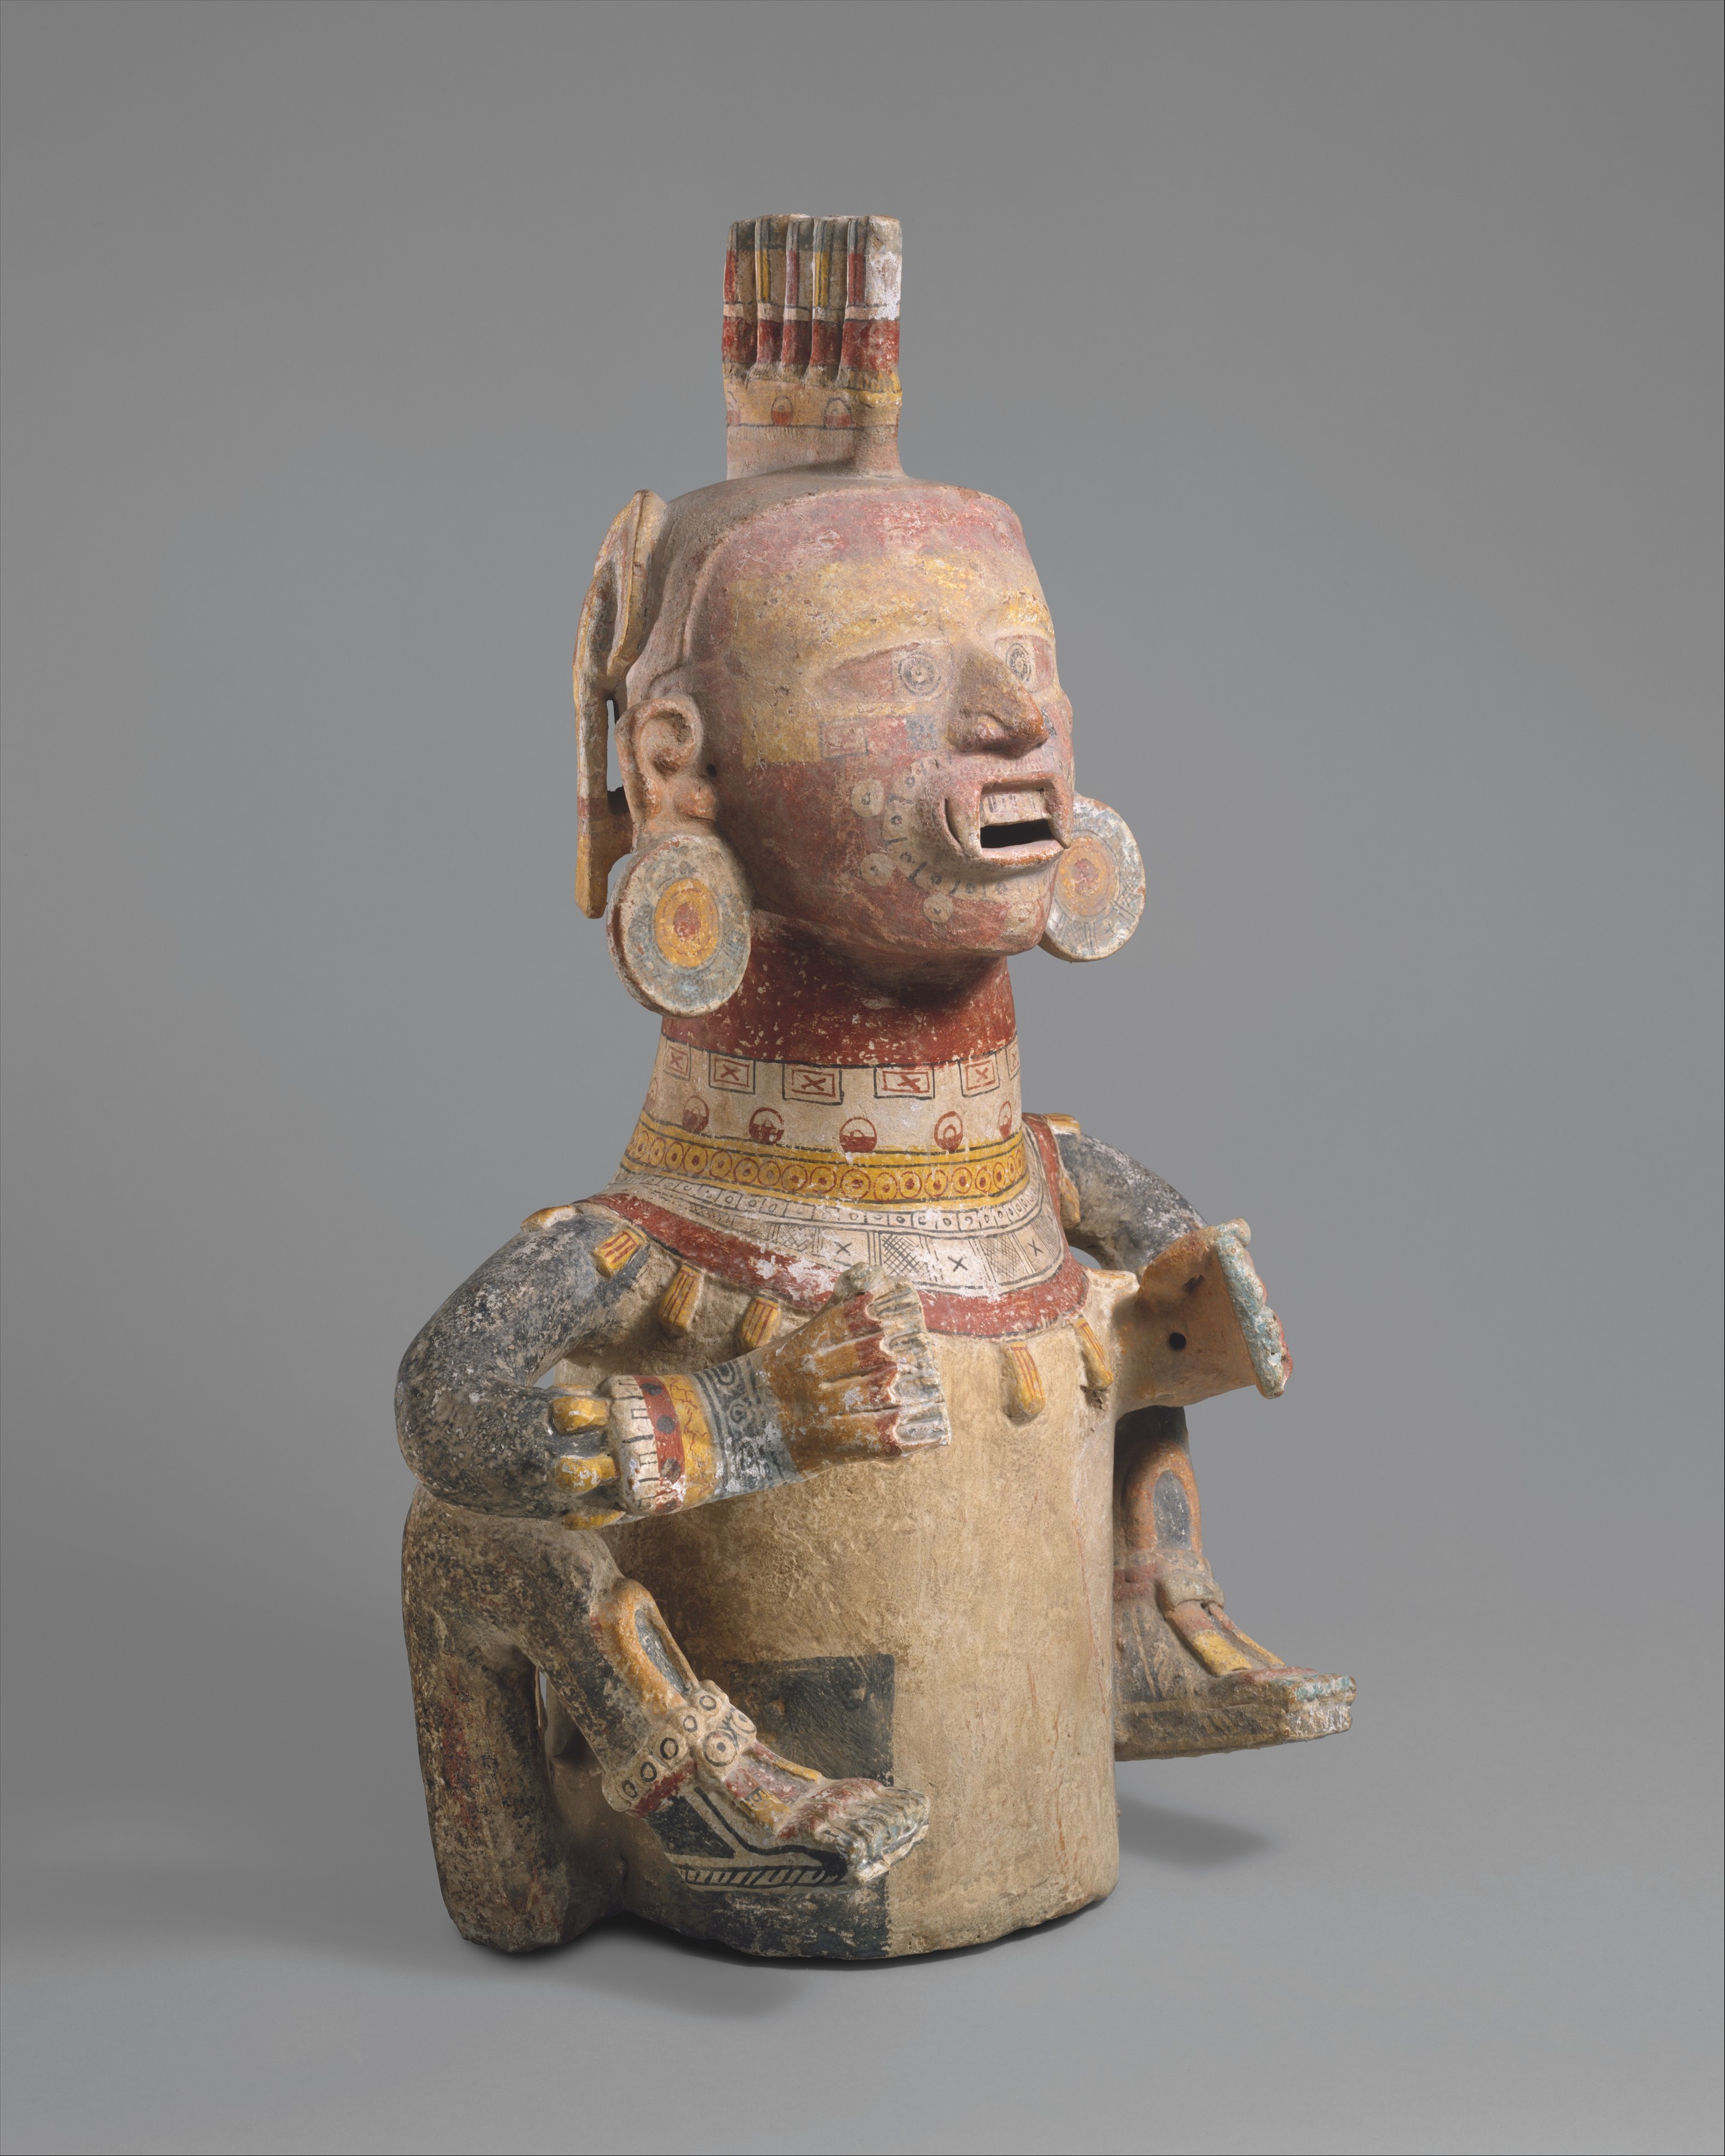 Santería objects prepared for animal sacrifice. The small ”heads” with